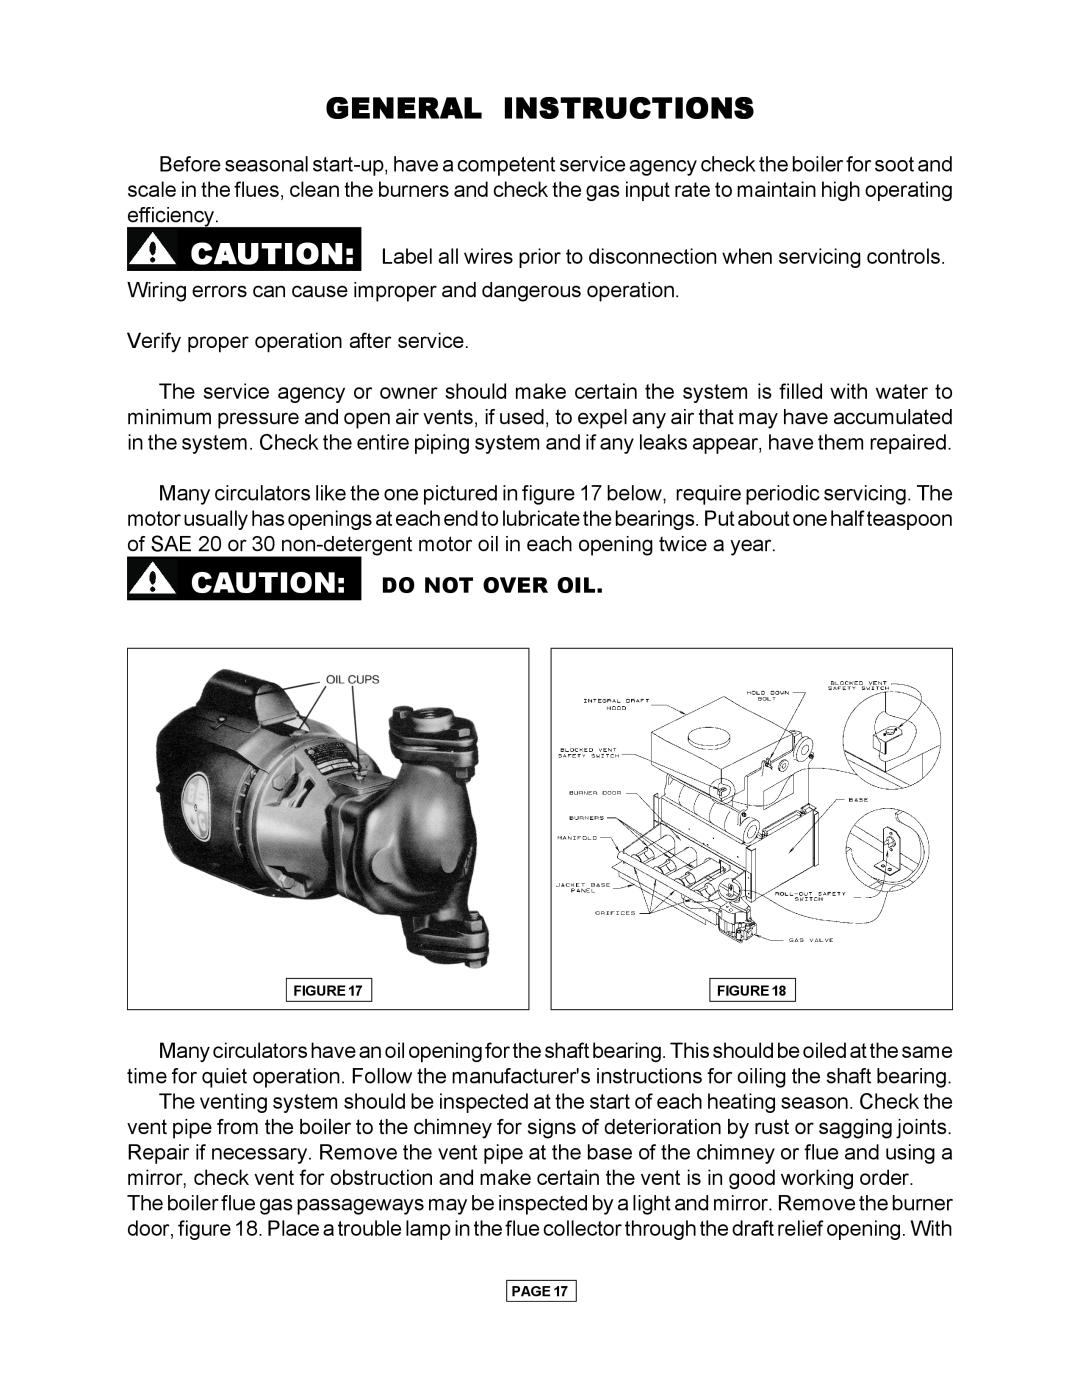 Utica Gas-fired Boiler manual General Instructions, Do Not Over Oil 